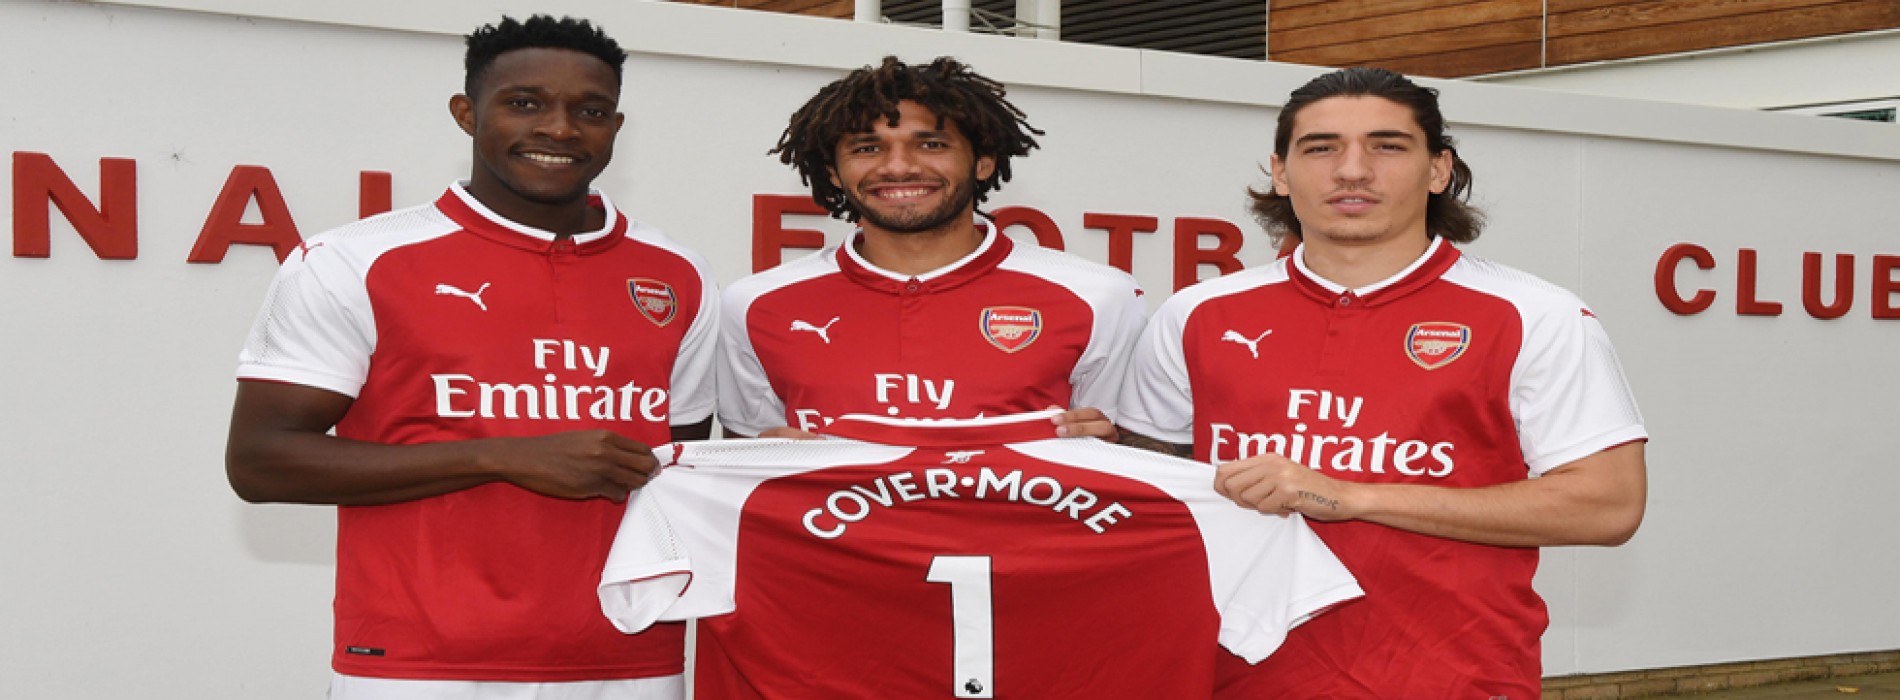 Arsenal welcomes Cover-More as official travel insurance partner